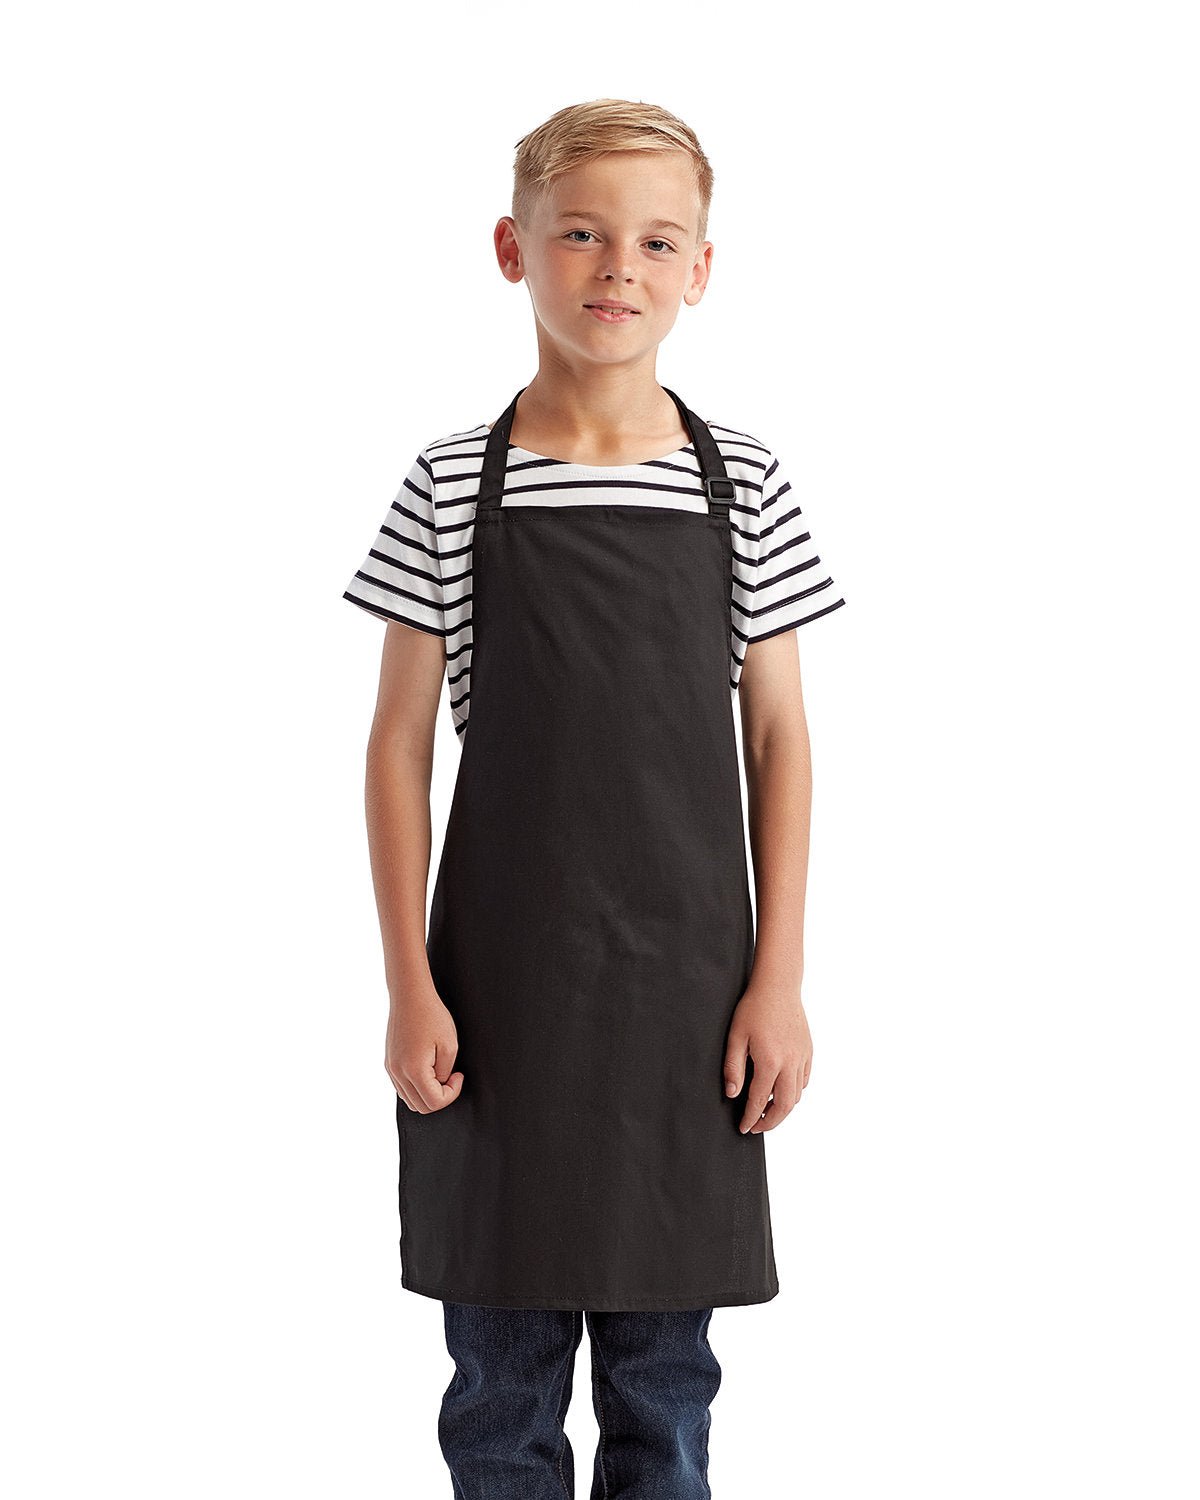 Blank Artisan Youth Apron - JJ's Party House